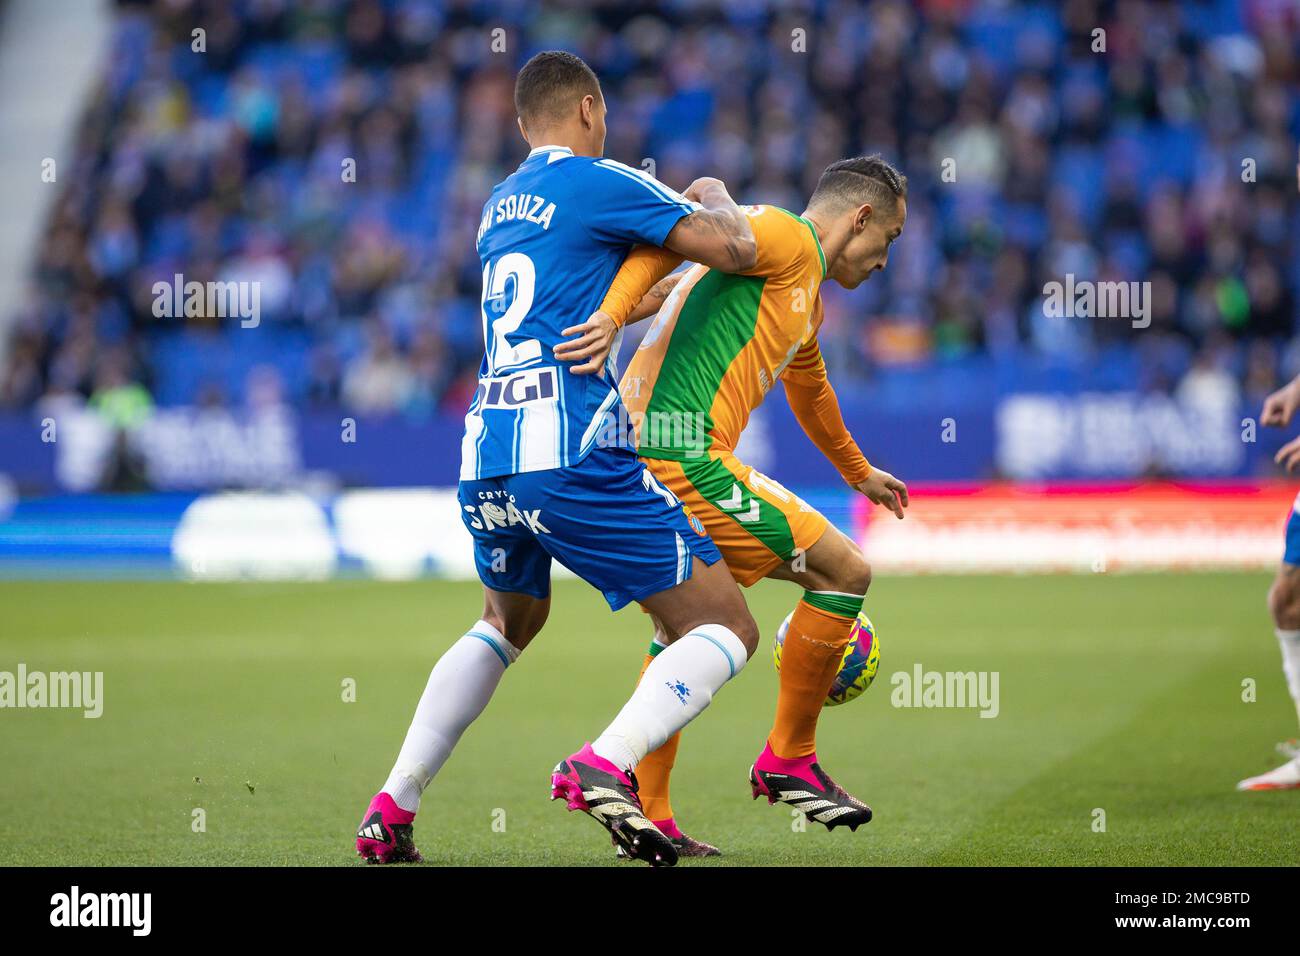 Vinicius Souza of RCD Espanyol and Andres Guardado of Real Betis Balompie during the Liga match between RCD Espanyol and Real Betis at RCDE Stadium in Cornella, Spain. Stock Photo